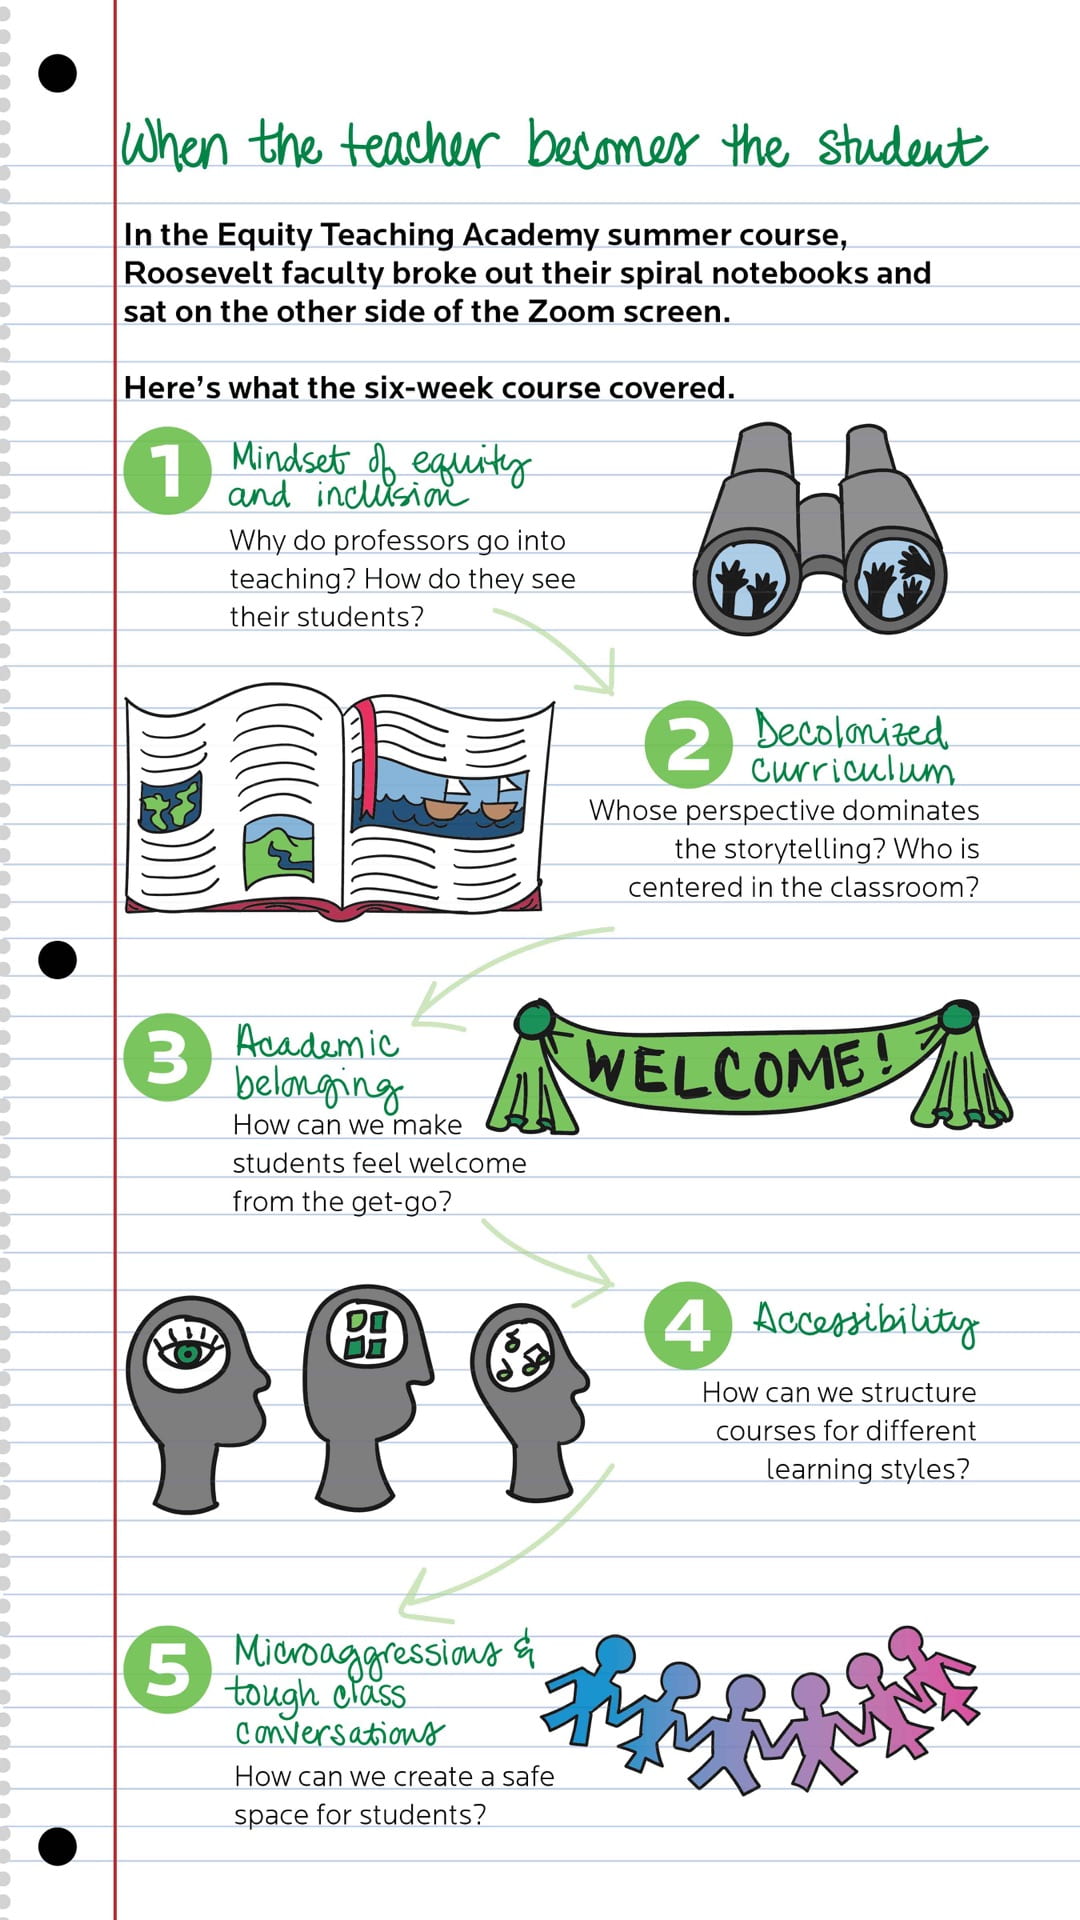 Infographic illustrates the main takeaways of the ETA course, like decolonized curriculum and accountability.